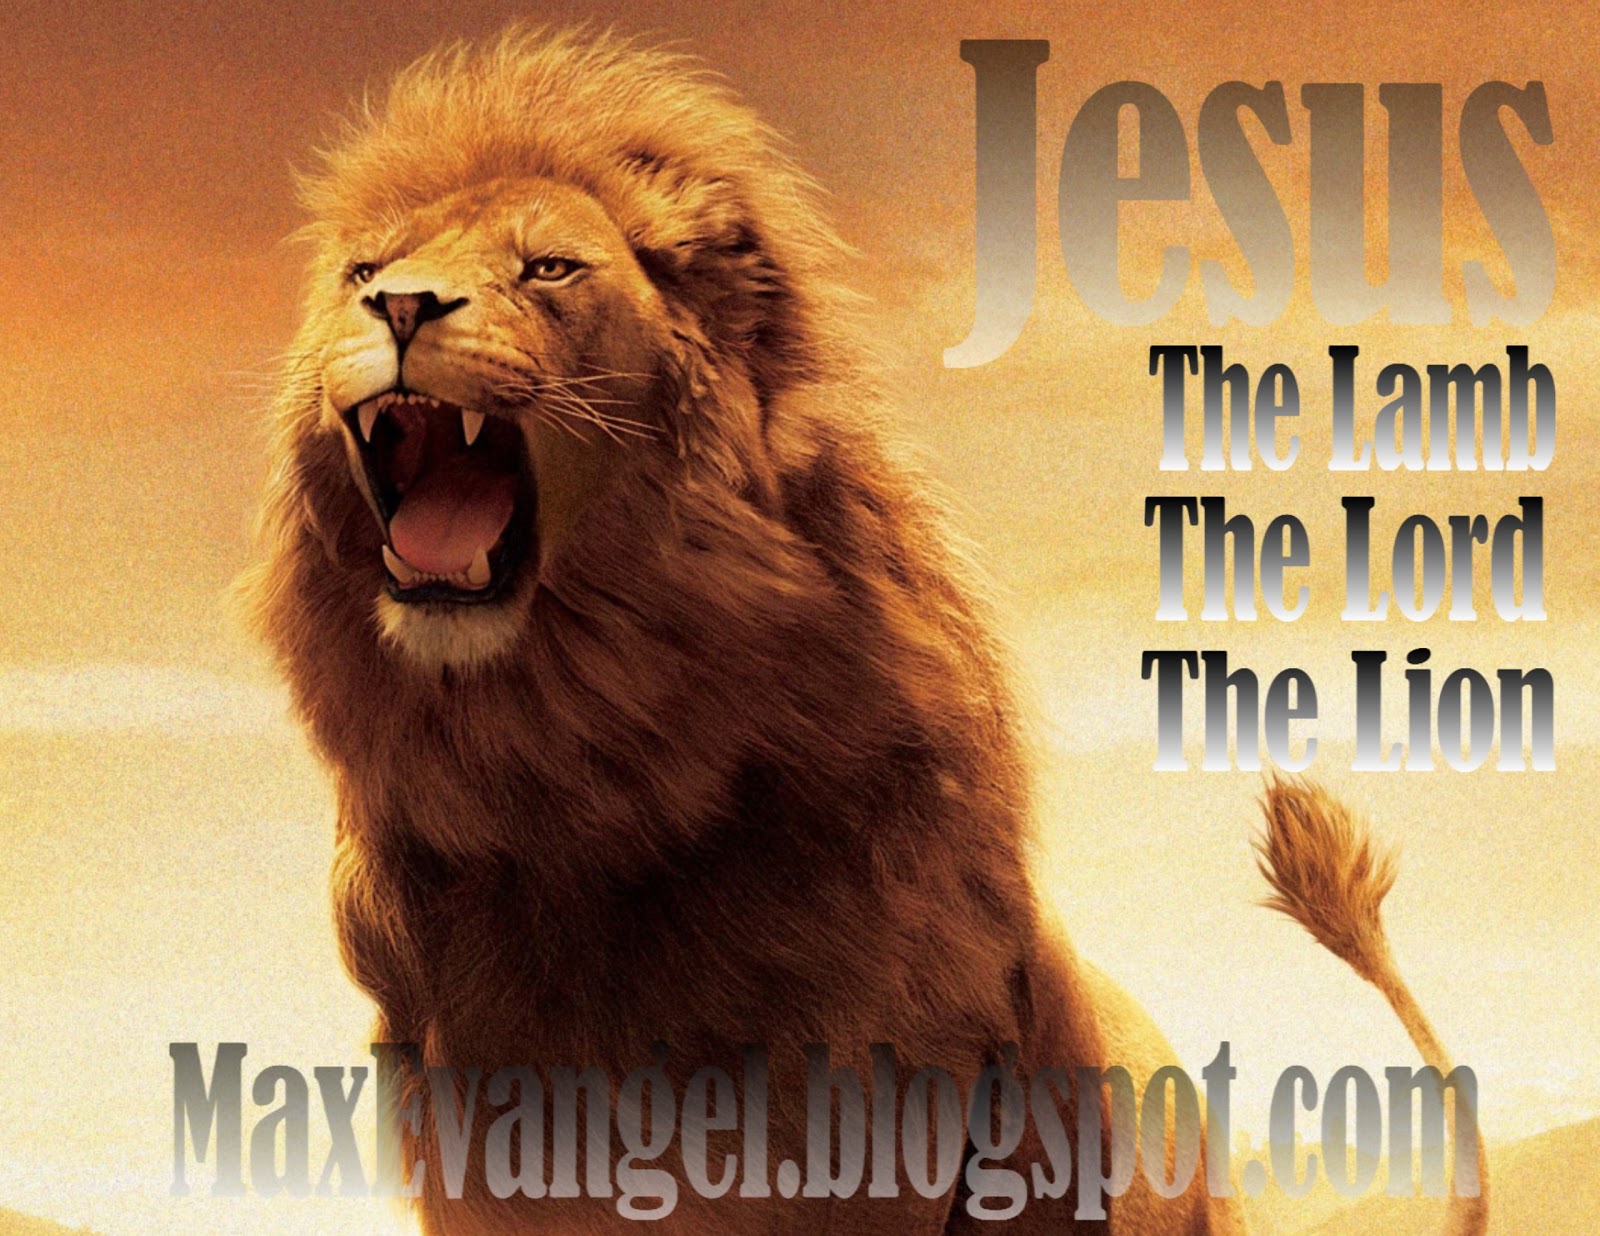 The lion the lamb